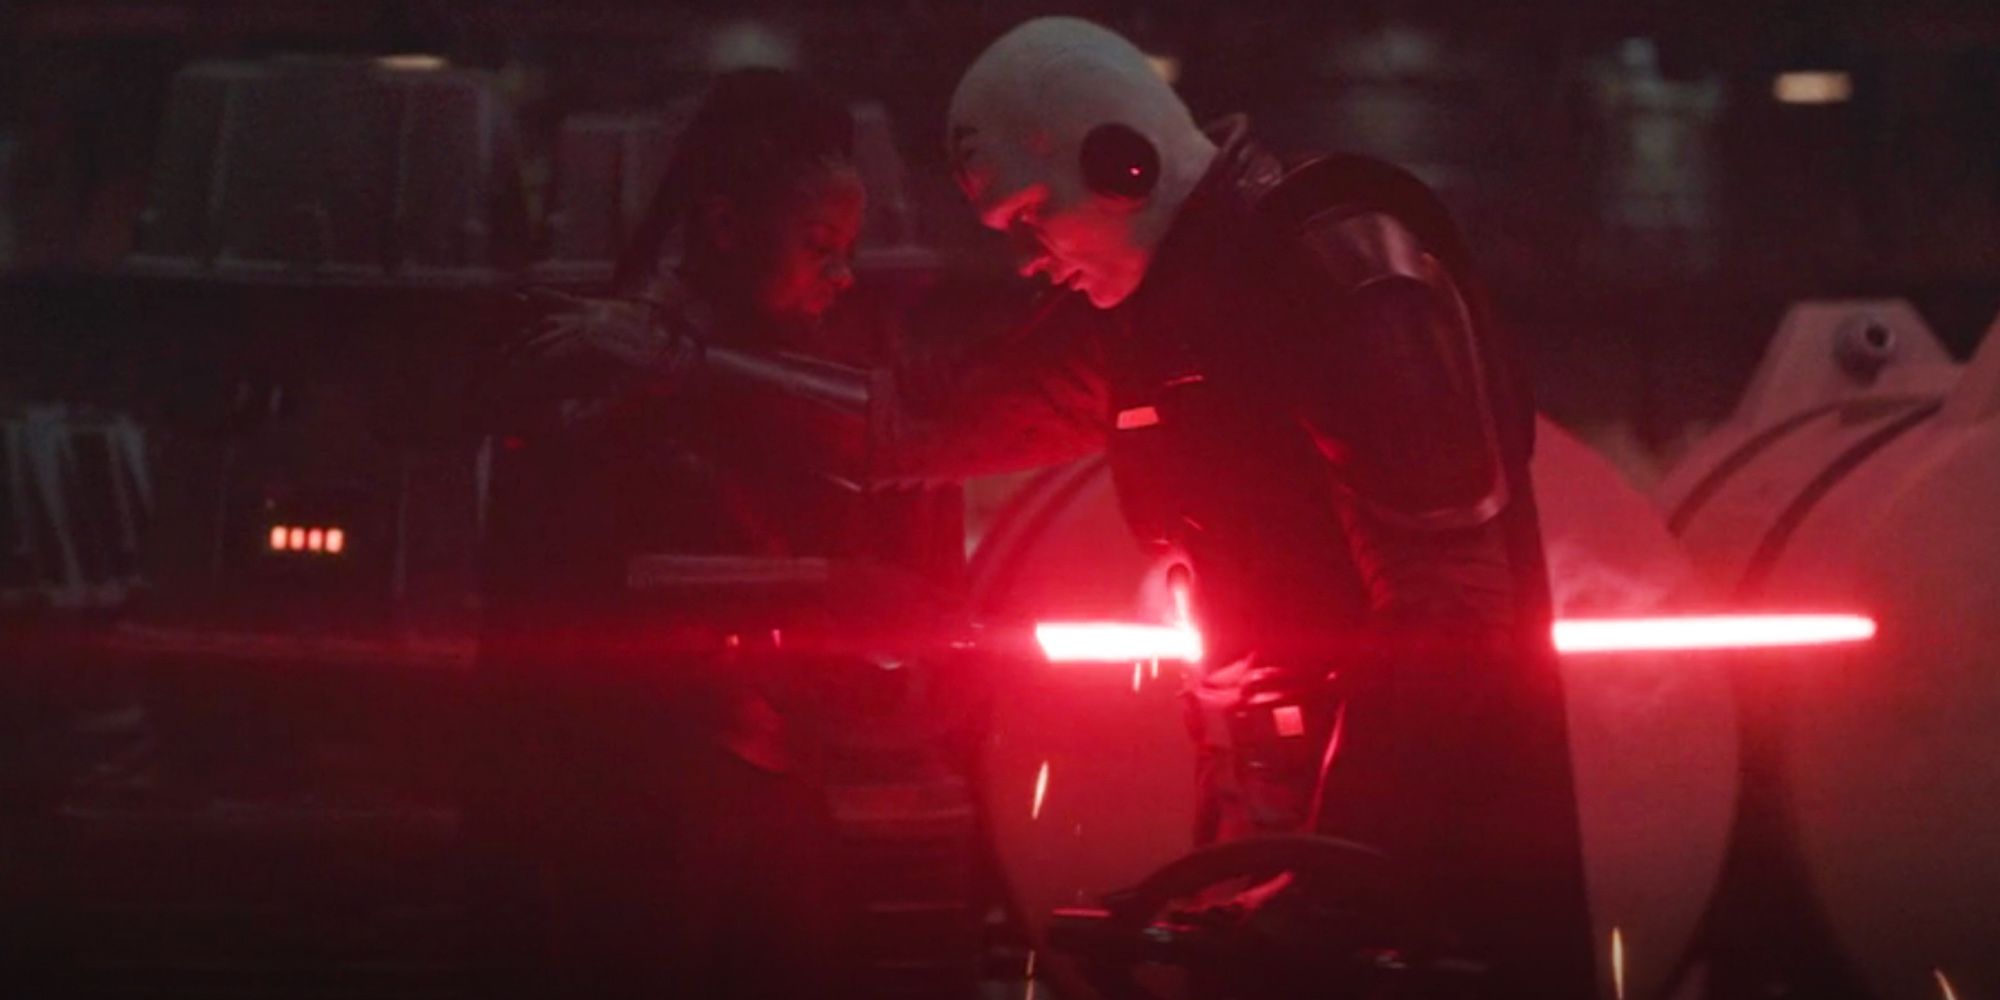 Star Wars' Inquisitor Death Fakeouts Are Getting Old